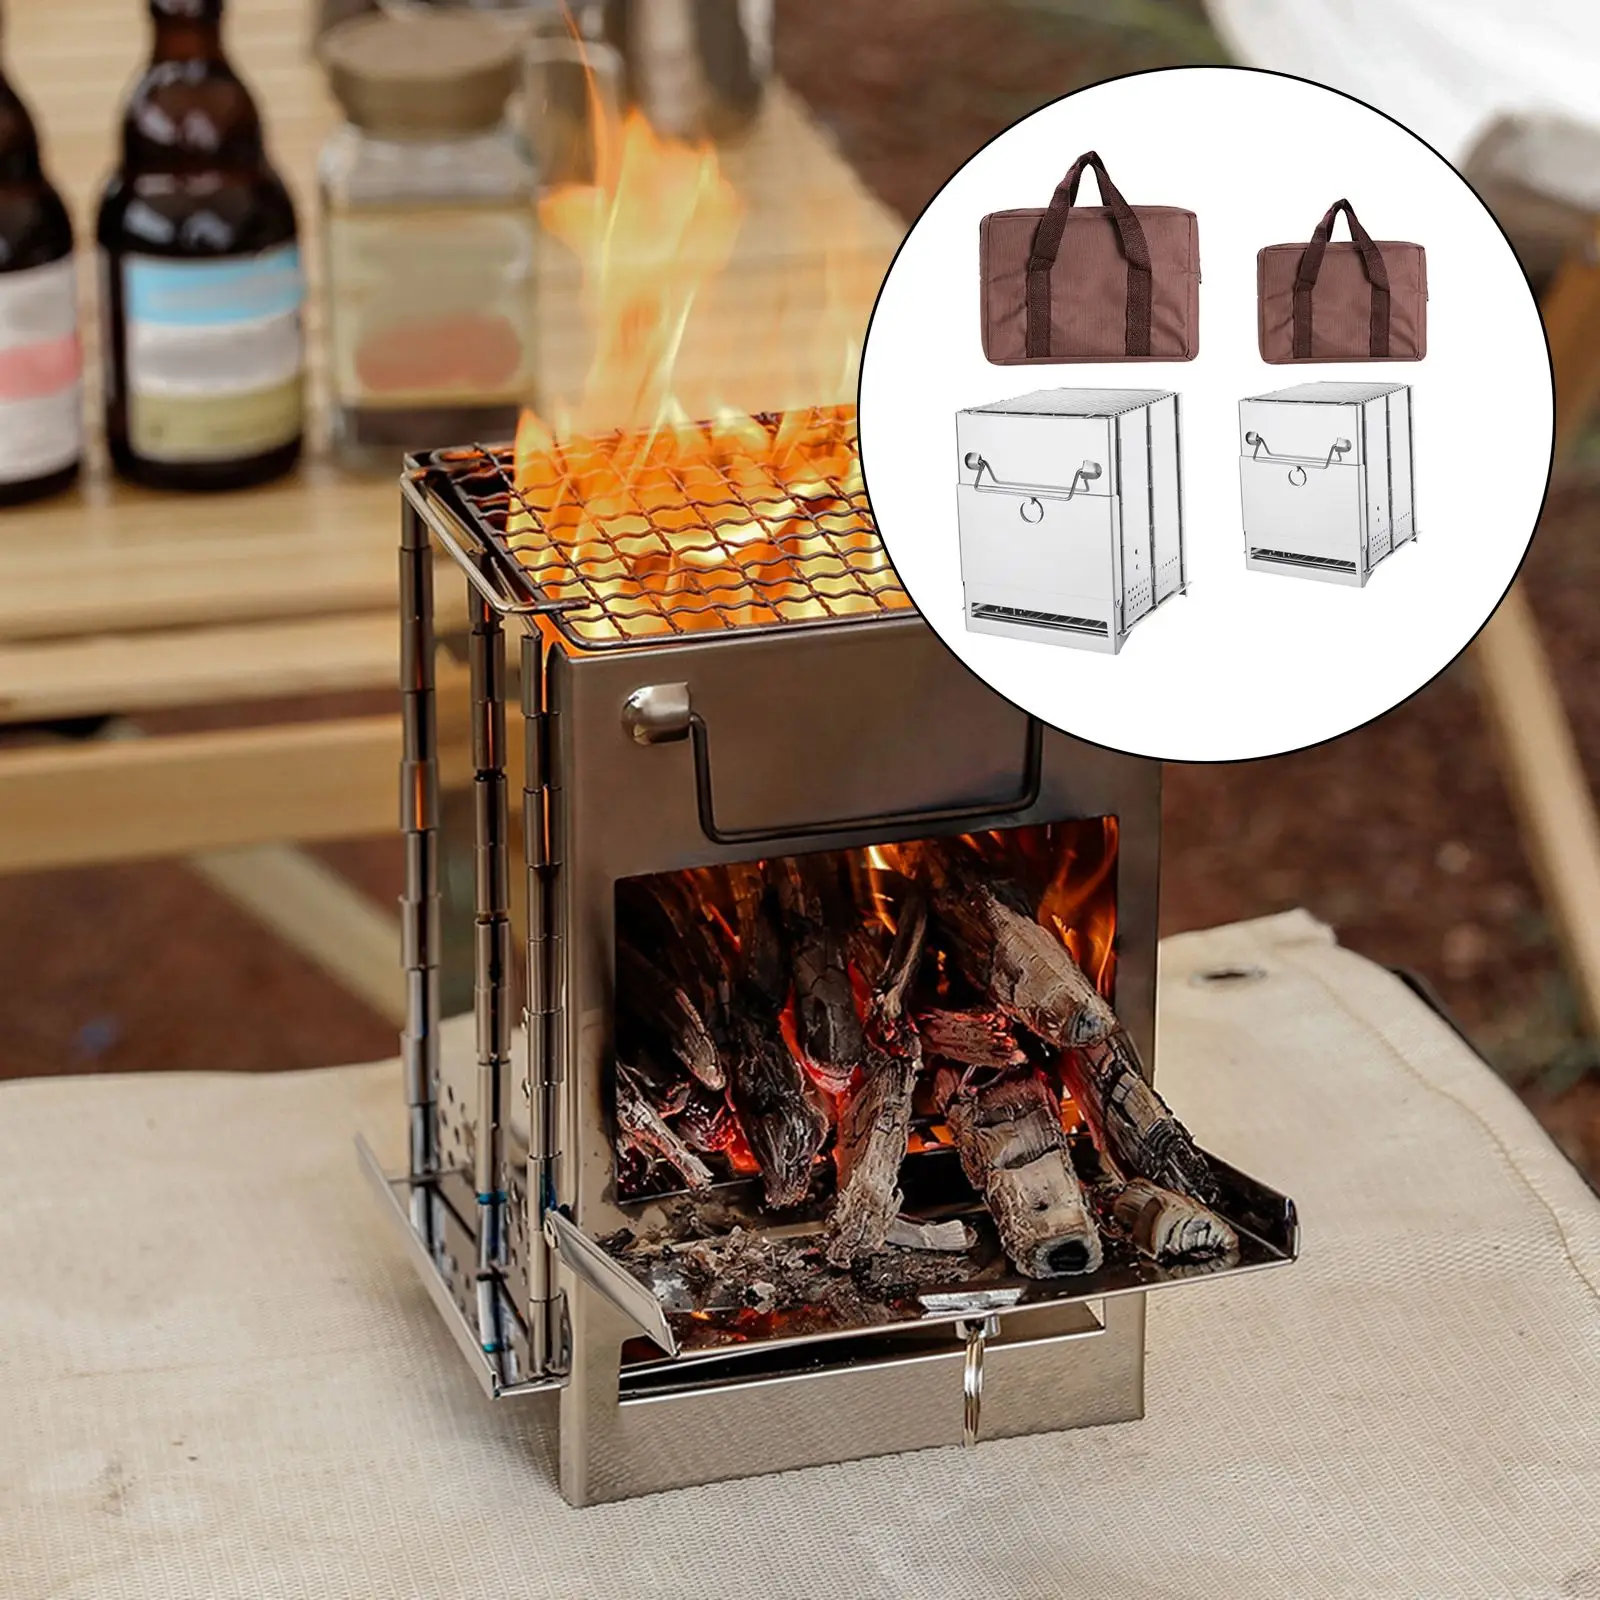 Outdoor Firewood Stove Camping Cooking Picnic Grill Folding Stove Square Wood Travel Charcoal Stove